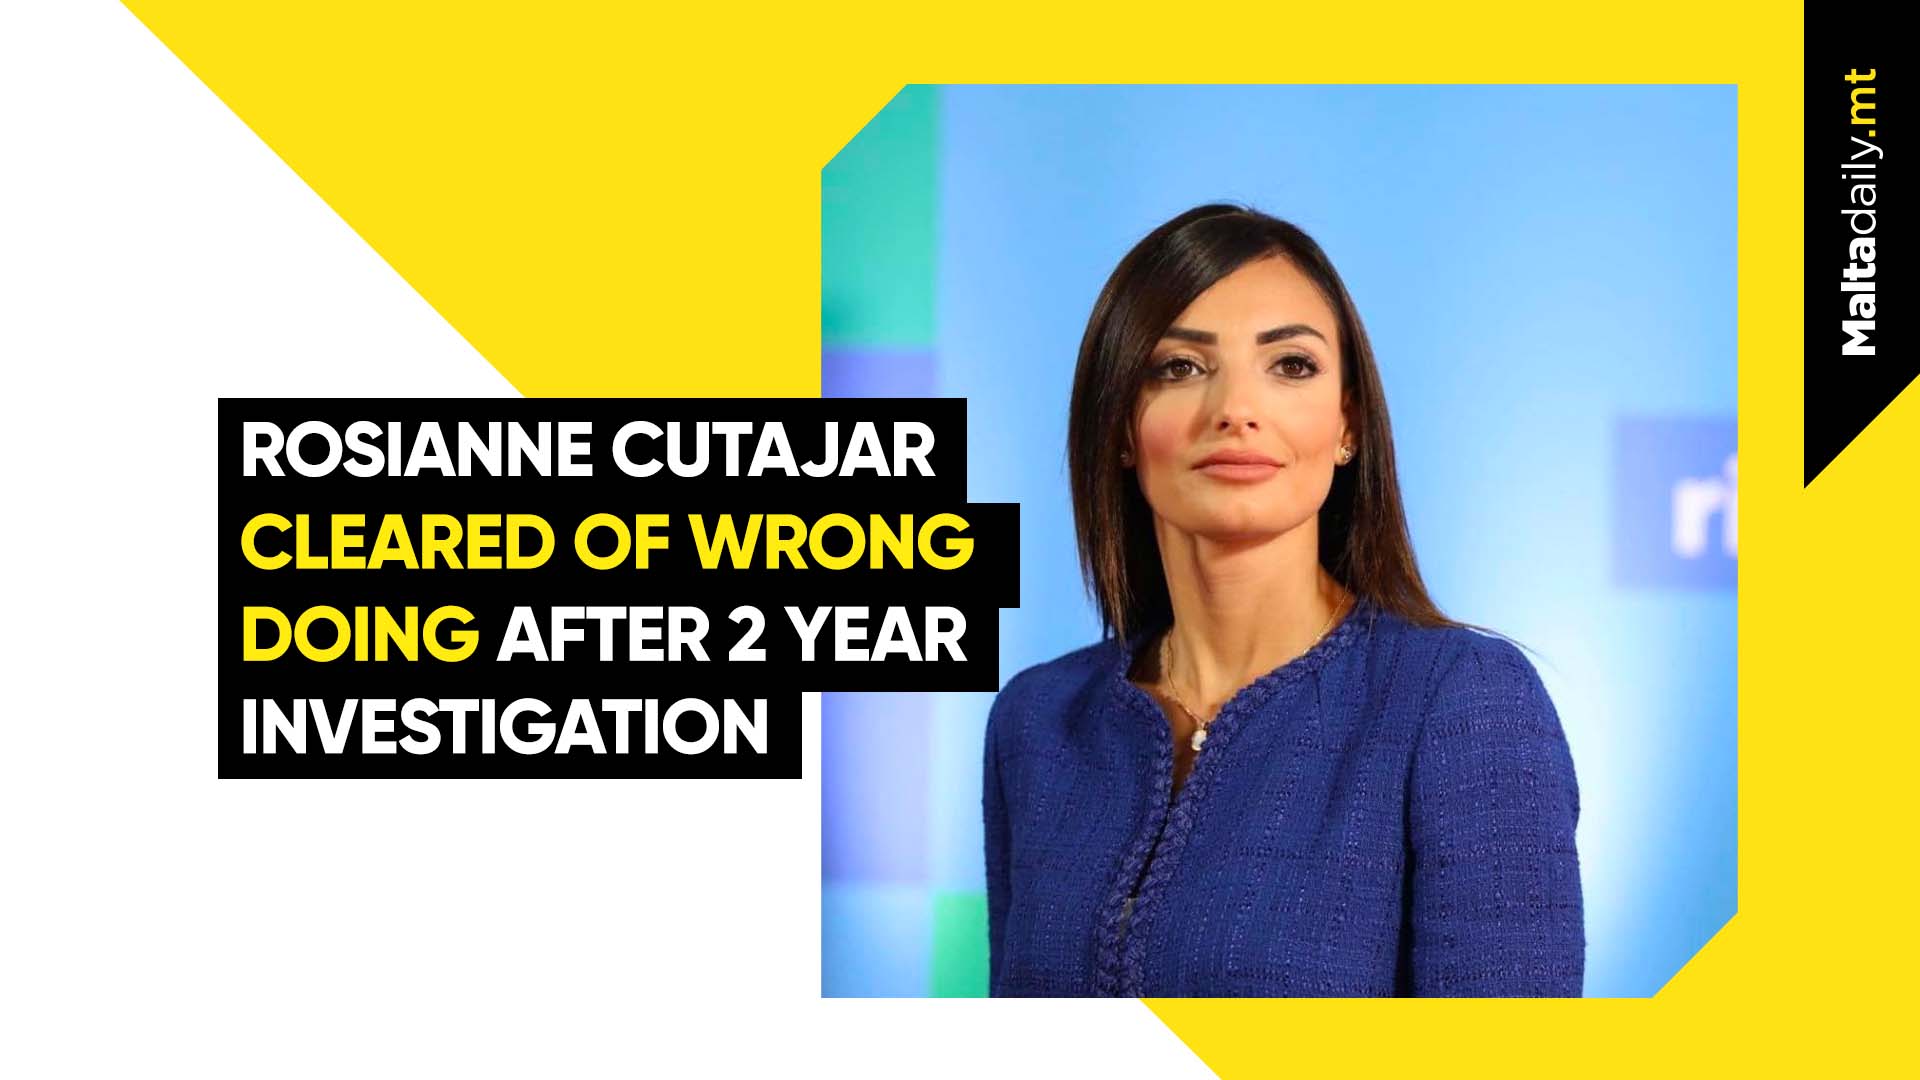 Rosianne Cutajar Cleared Of Wrongdoing After 2 Year Investigation